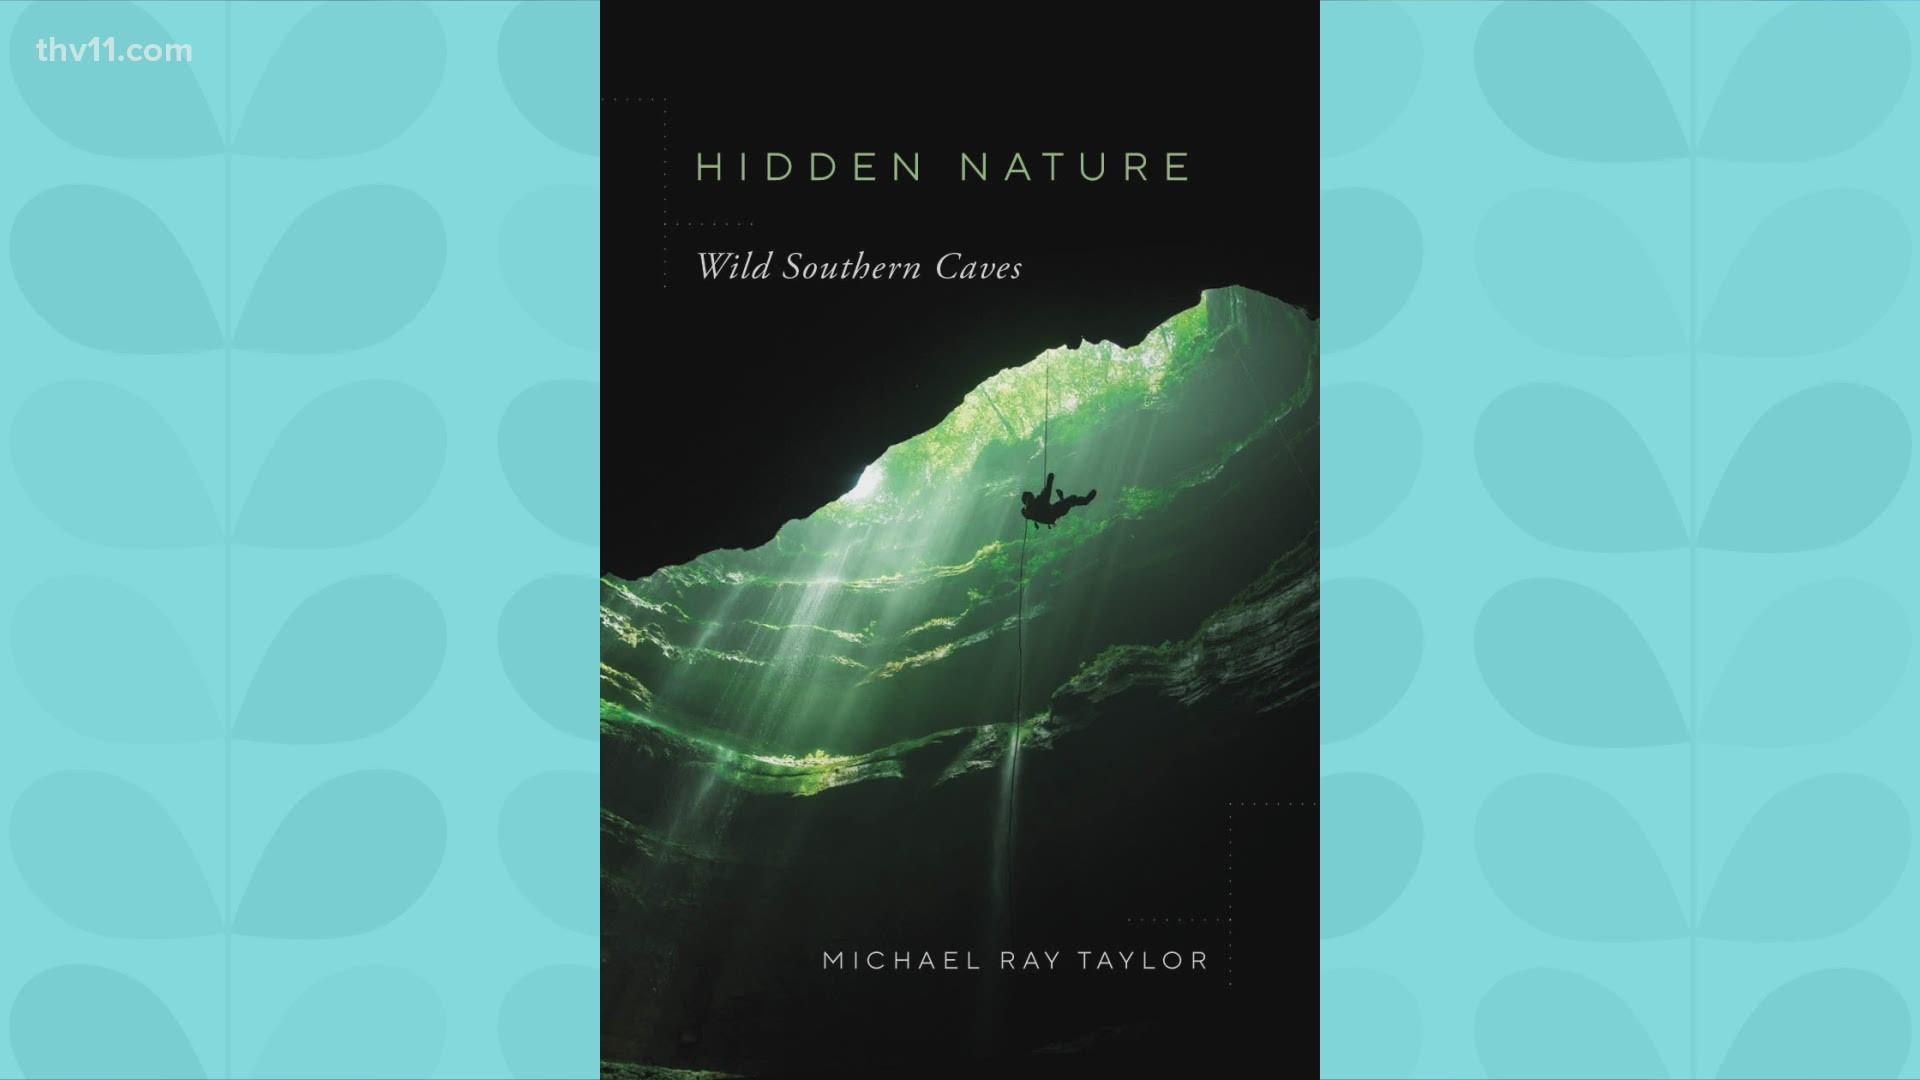 Henderson State professor Michael Ray Taylor has been exploring caves all his life and he's sharing those journeys in his book.